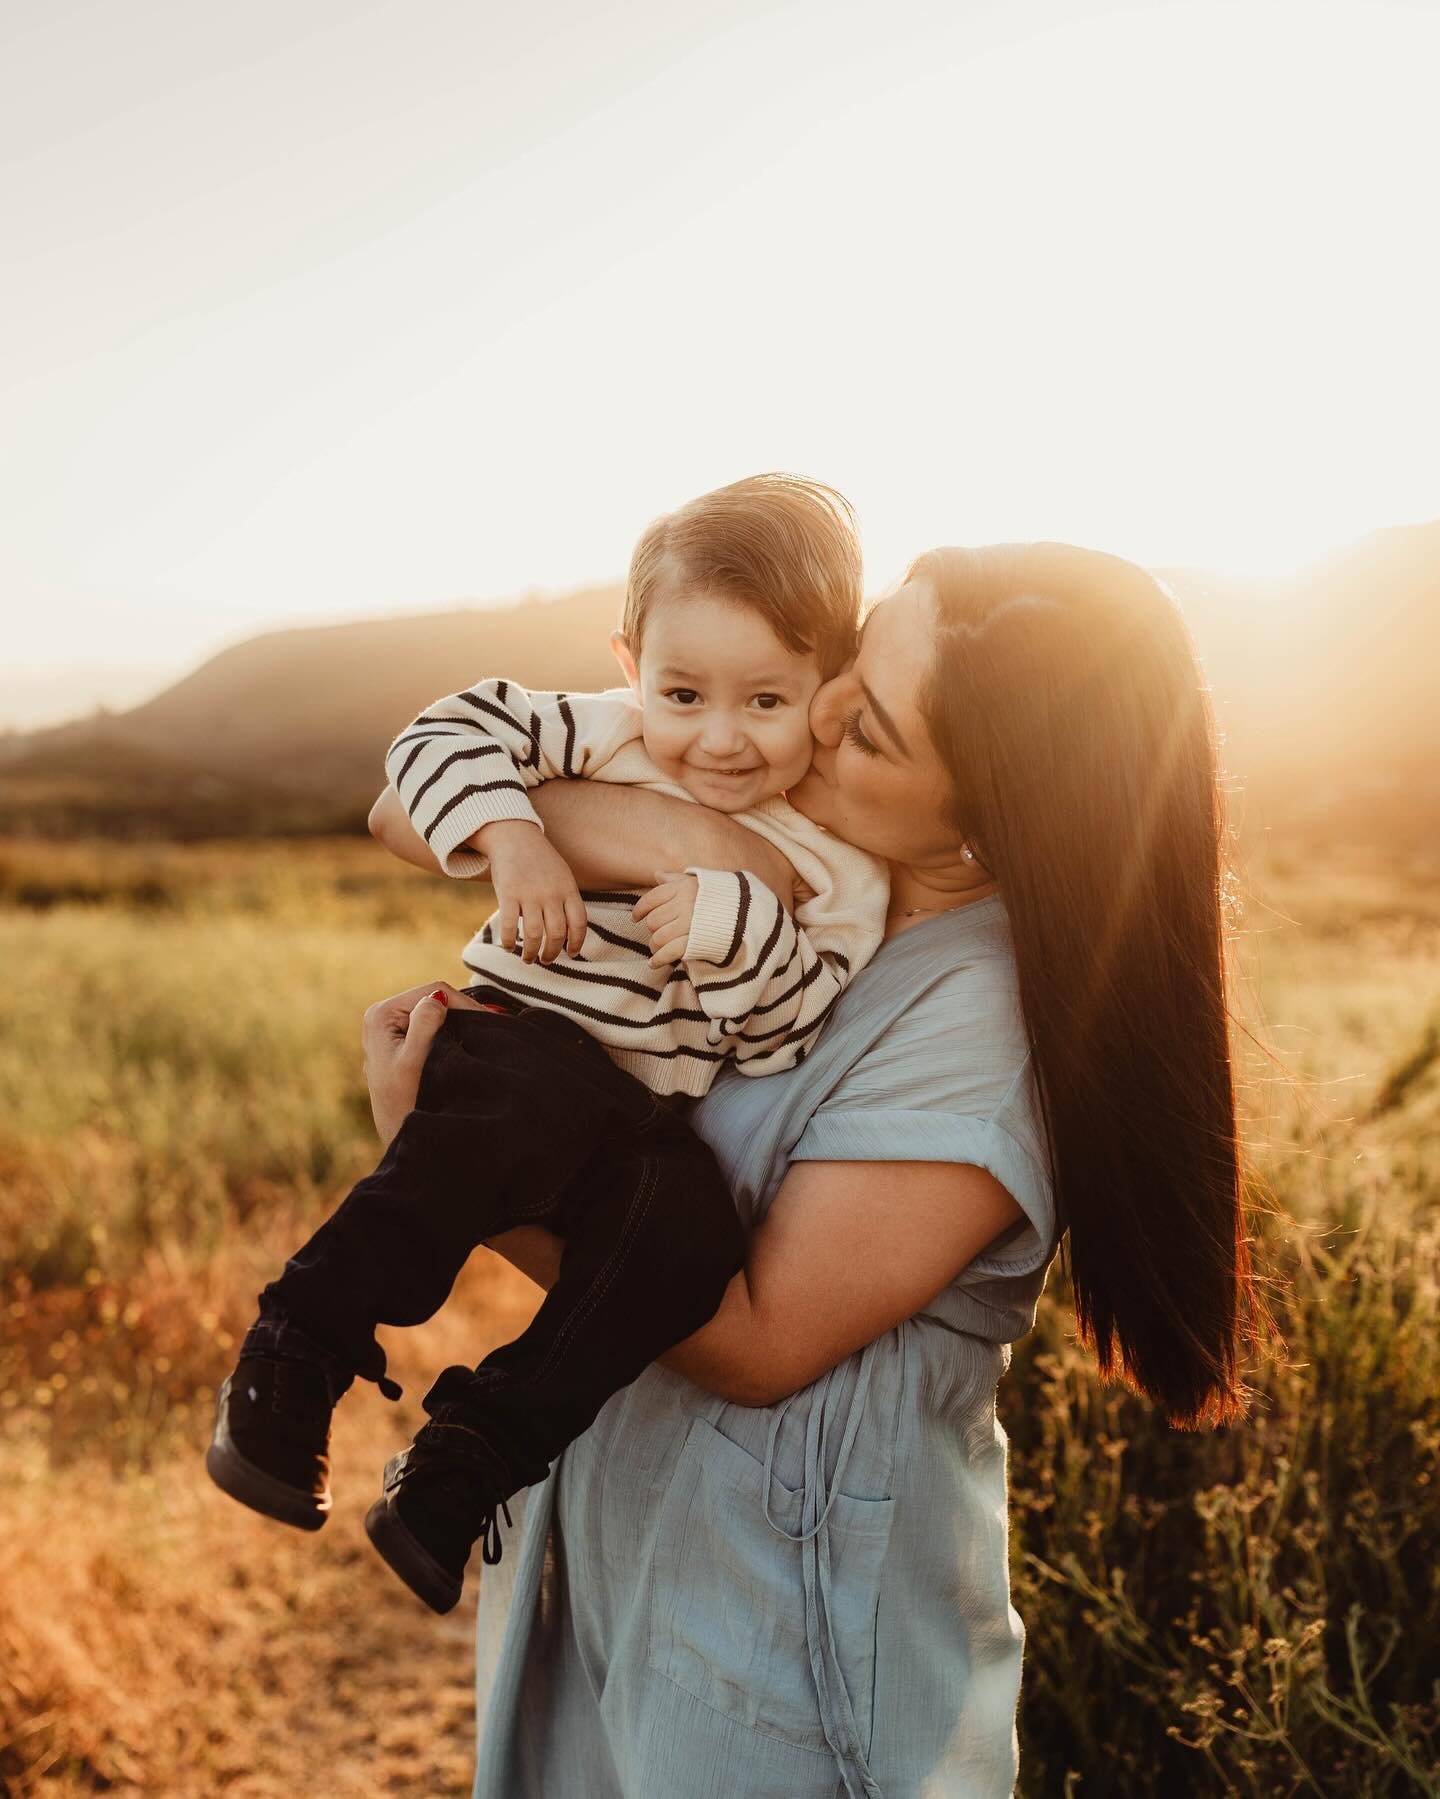 Wishing a happy belated Mother&rsquo;s Day to all of the mamas out there. YOU are the reason I do what I do. Parenthood is an insane journey - and I relish in having the privilege to photograph so many moments in my clients&rsquo; journeys with their